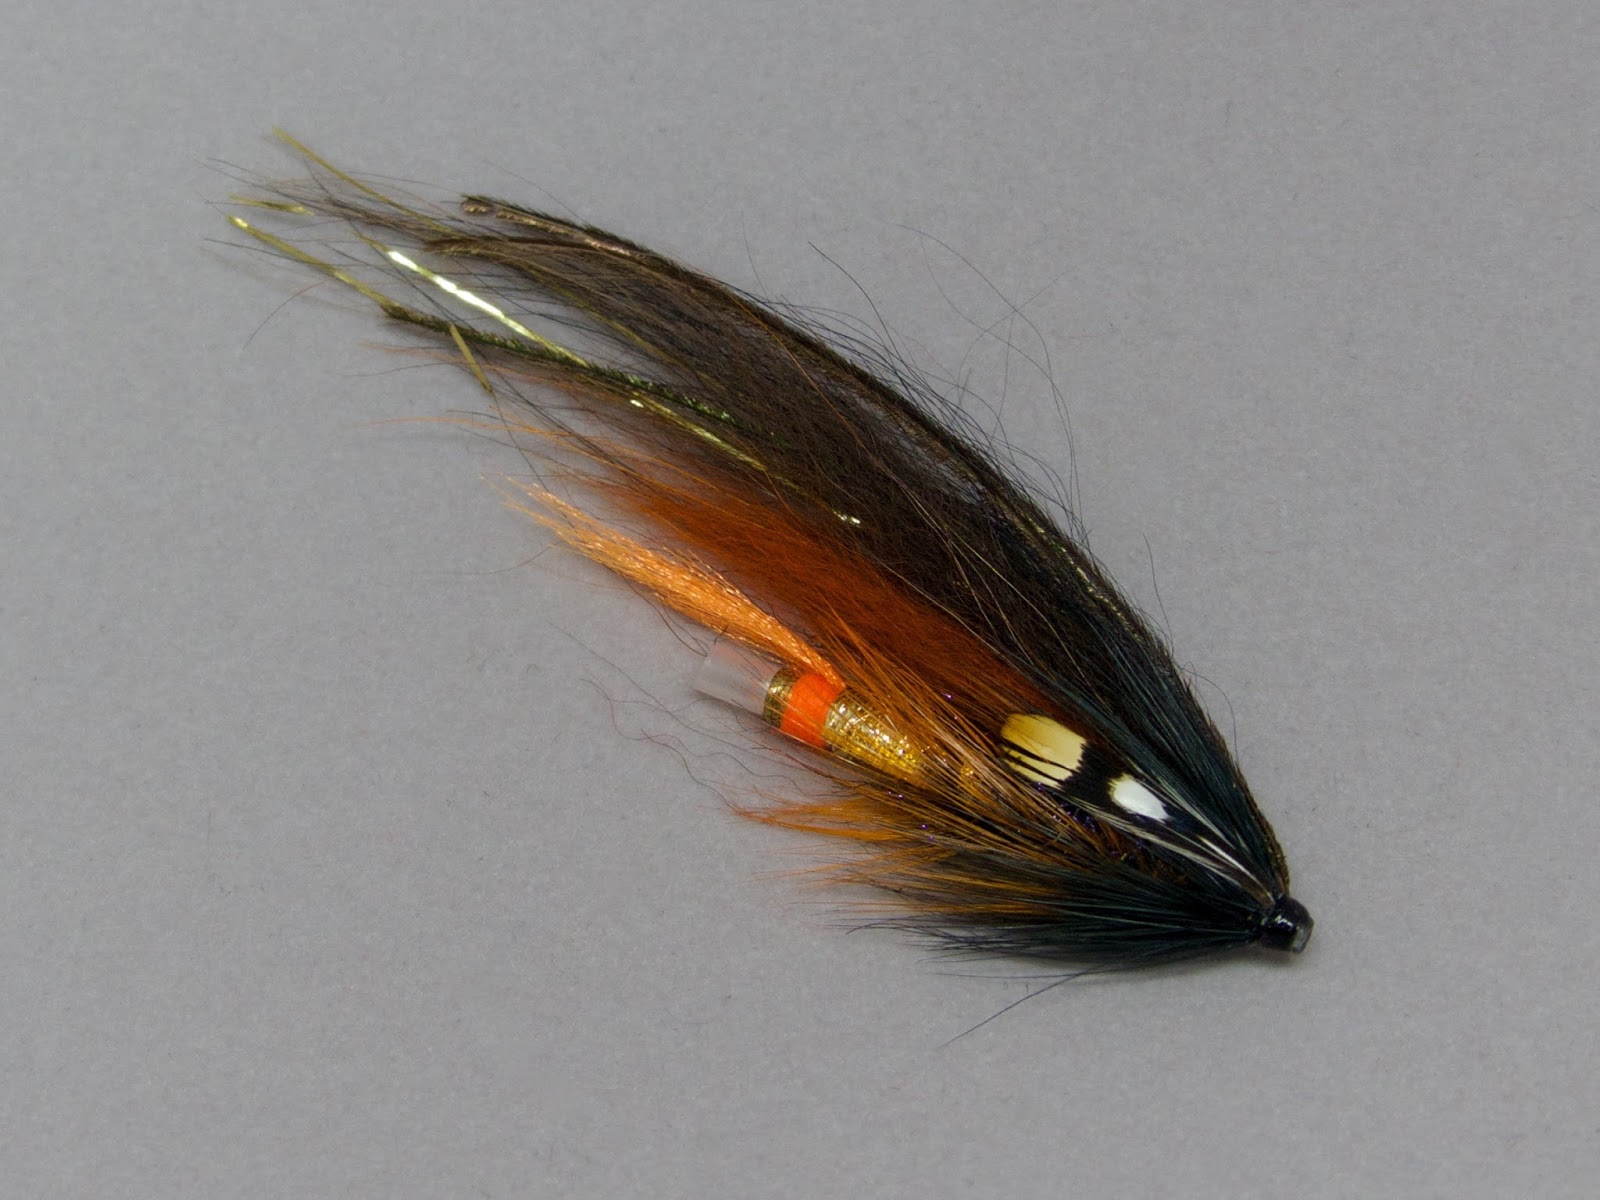 Atlantic Salmon Flies: Temple Dogs and the Evolution of the